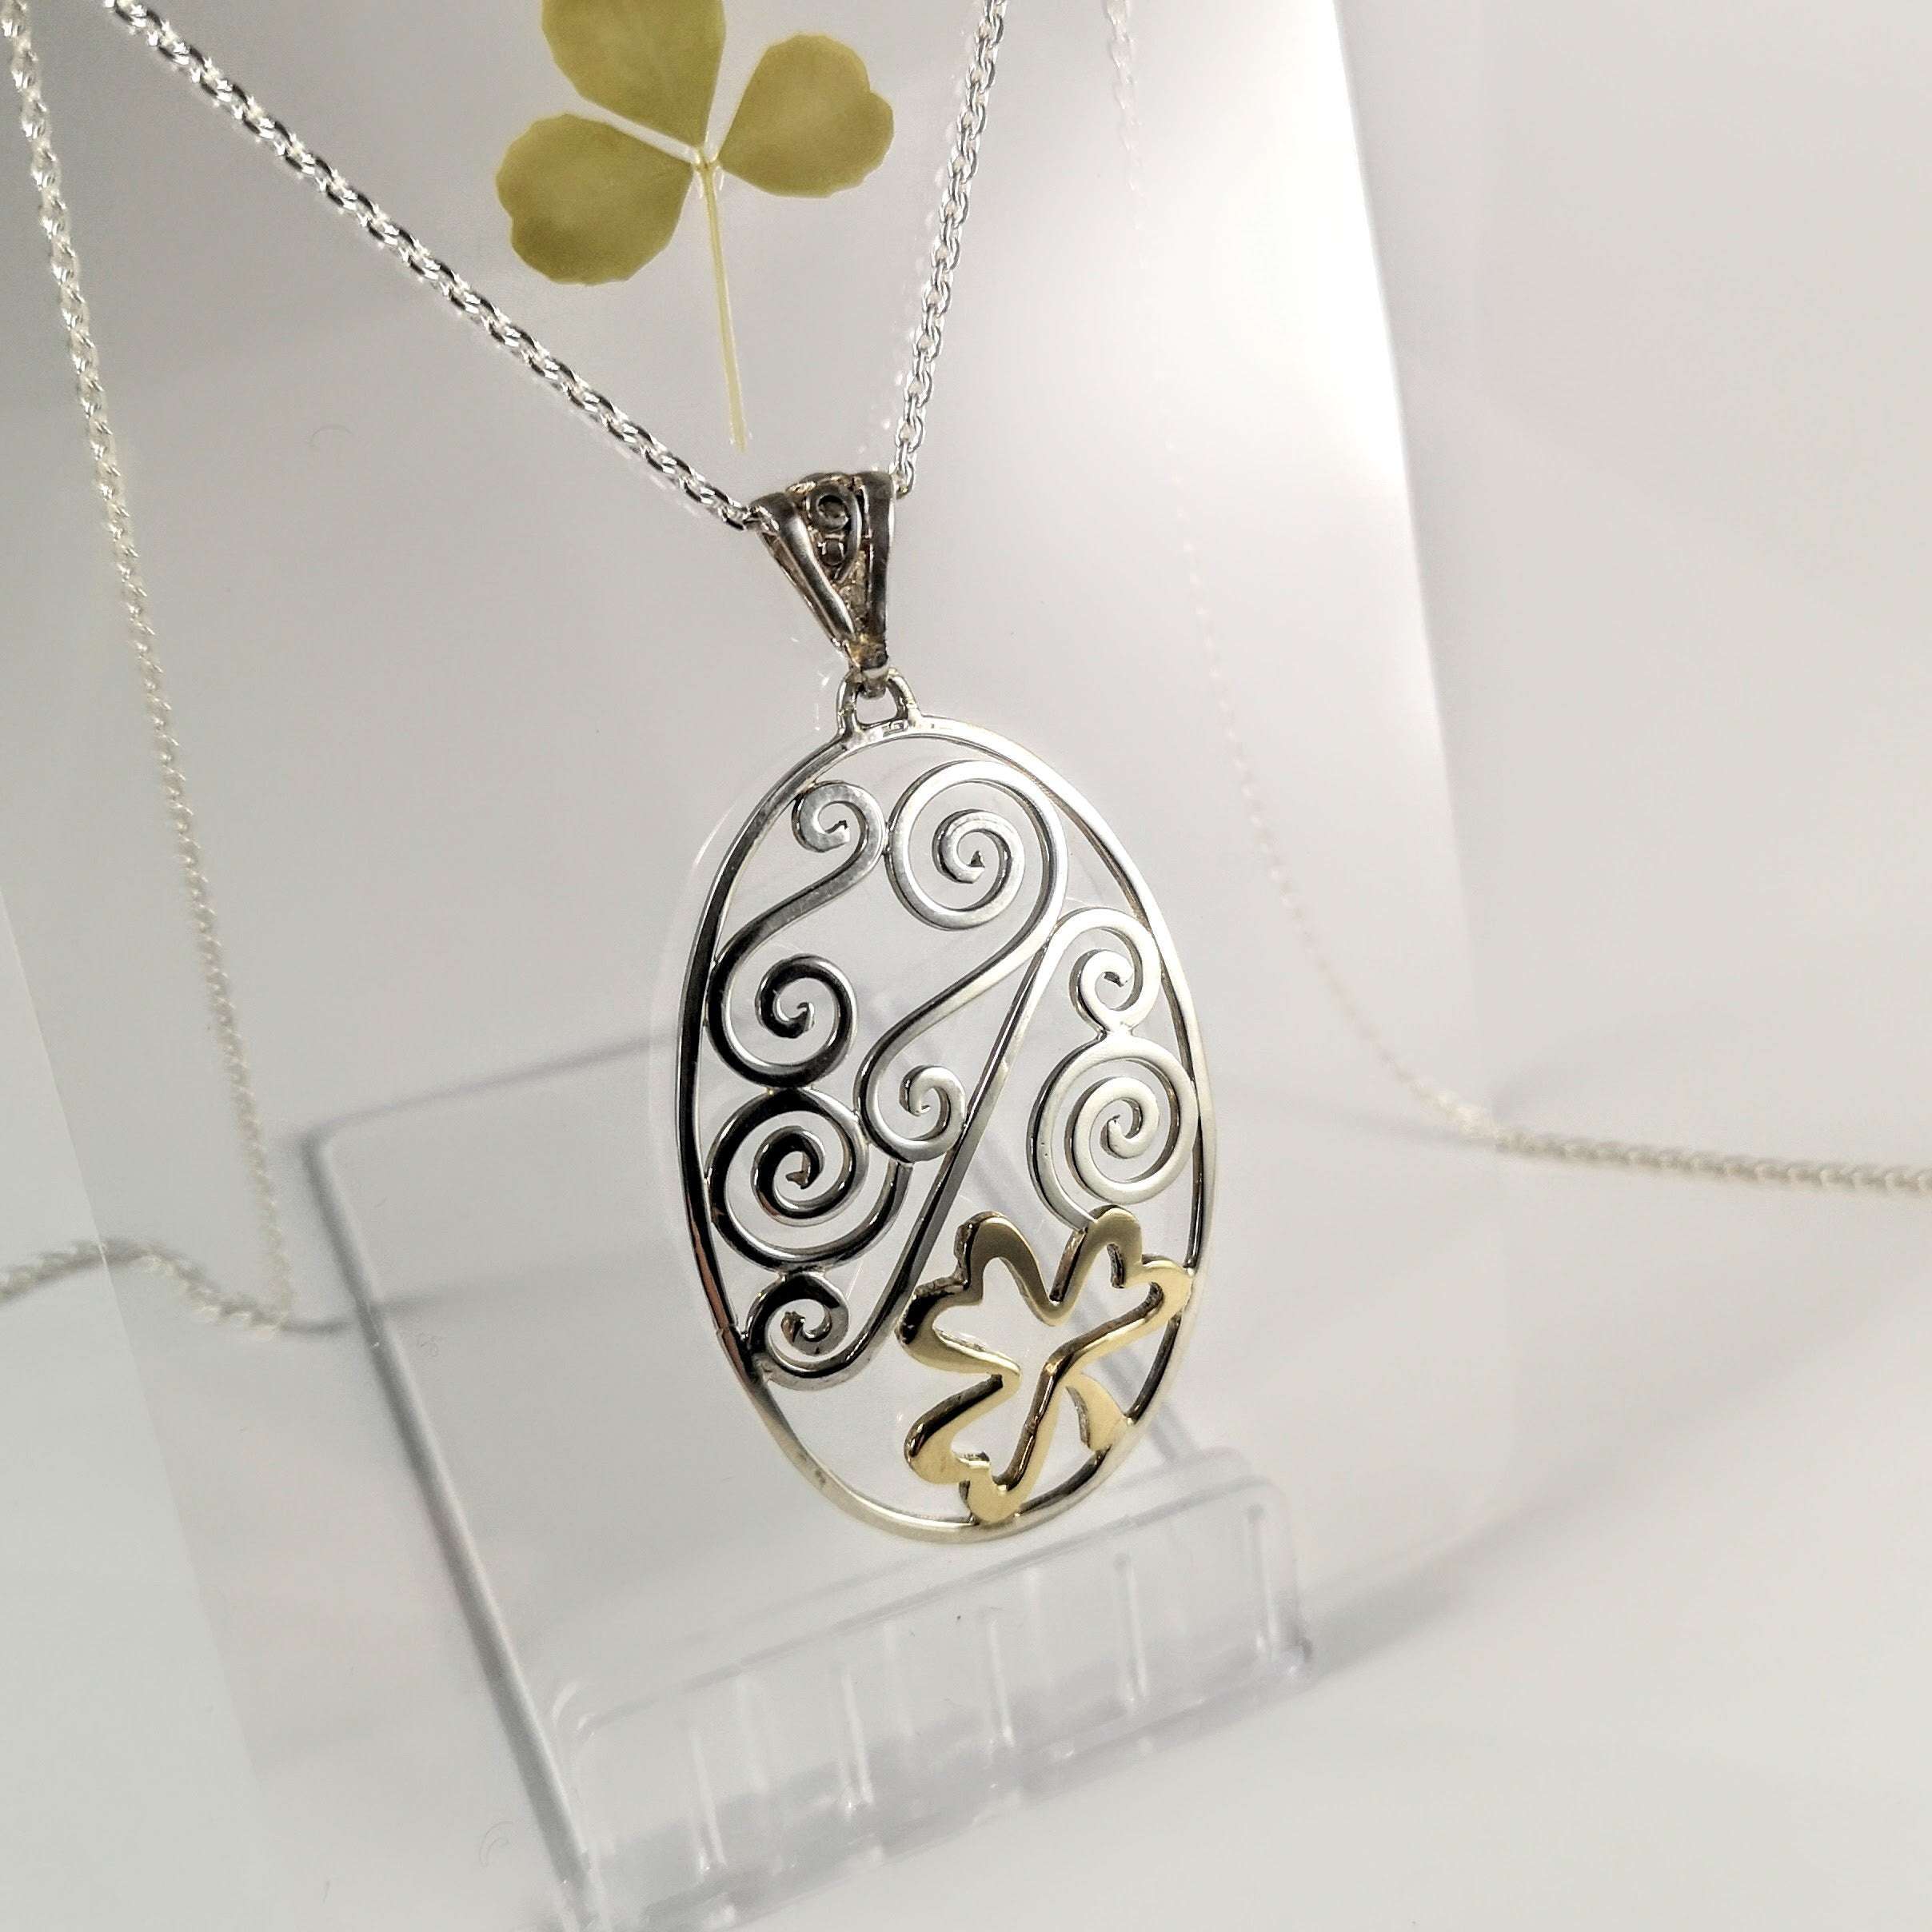 Celtic Combinations Sterling Silver Spiral Pendant with 9ct Gold Shamrock